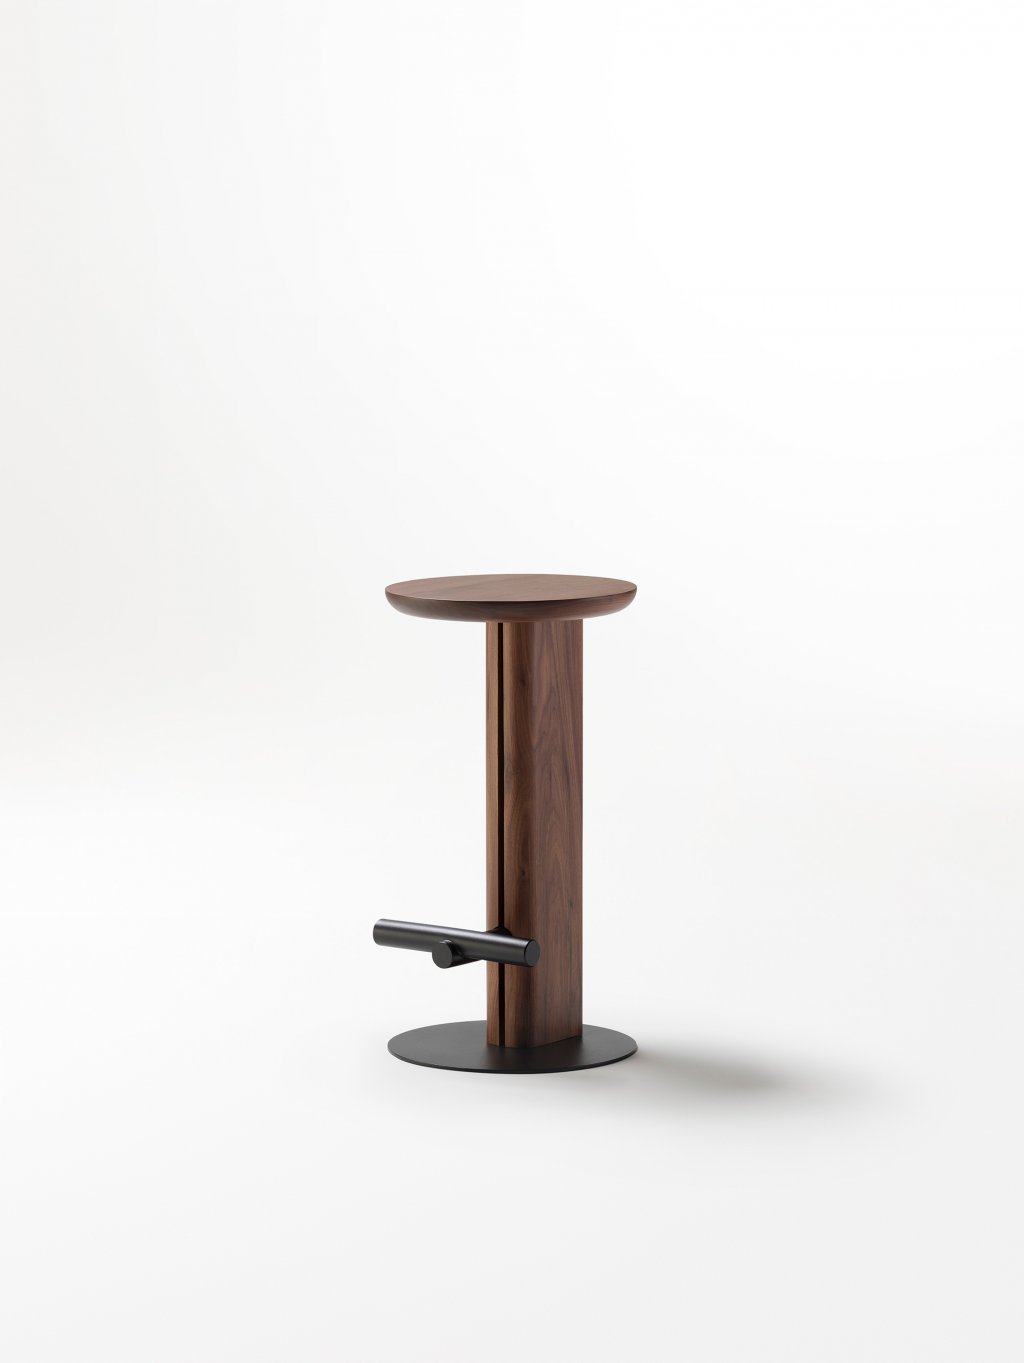 The Rook Stool